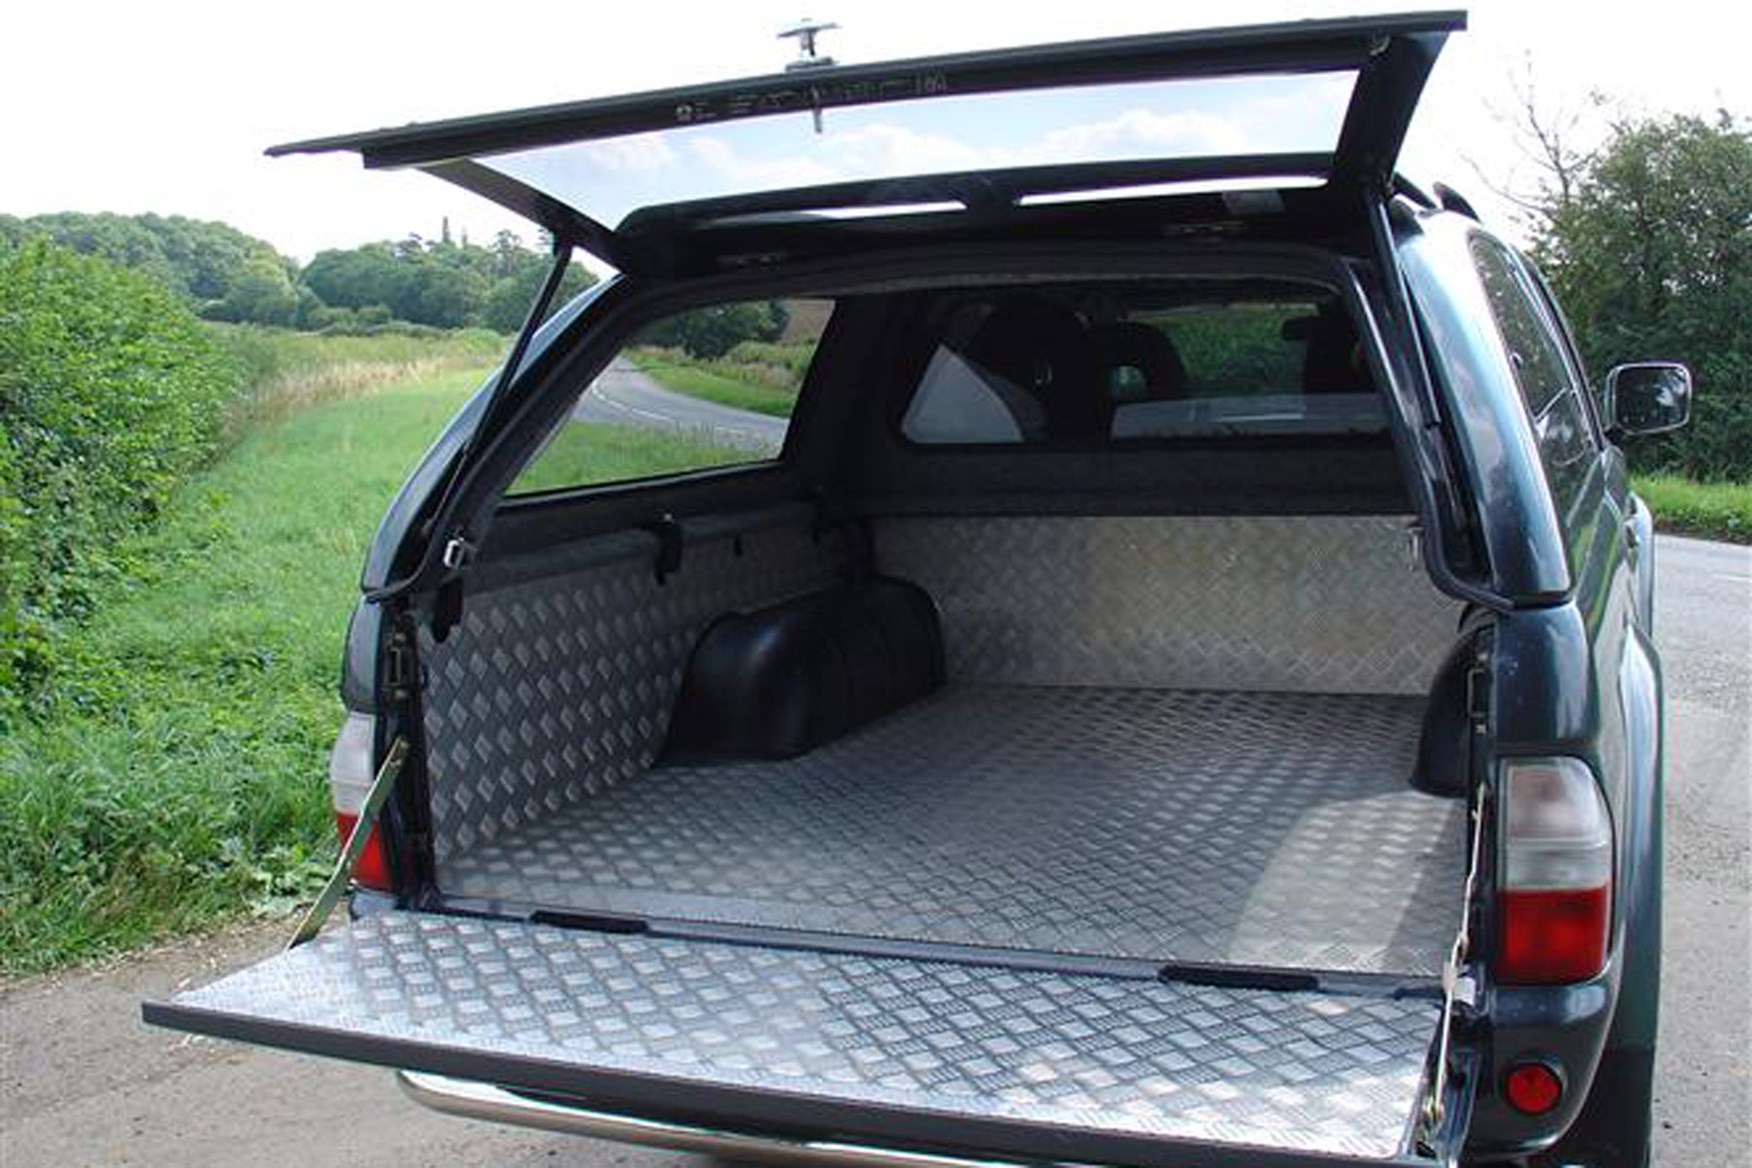 Mitsubishi L200 review on Parkers Vans - dimensions, load area